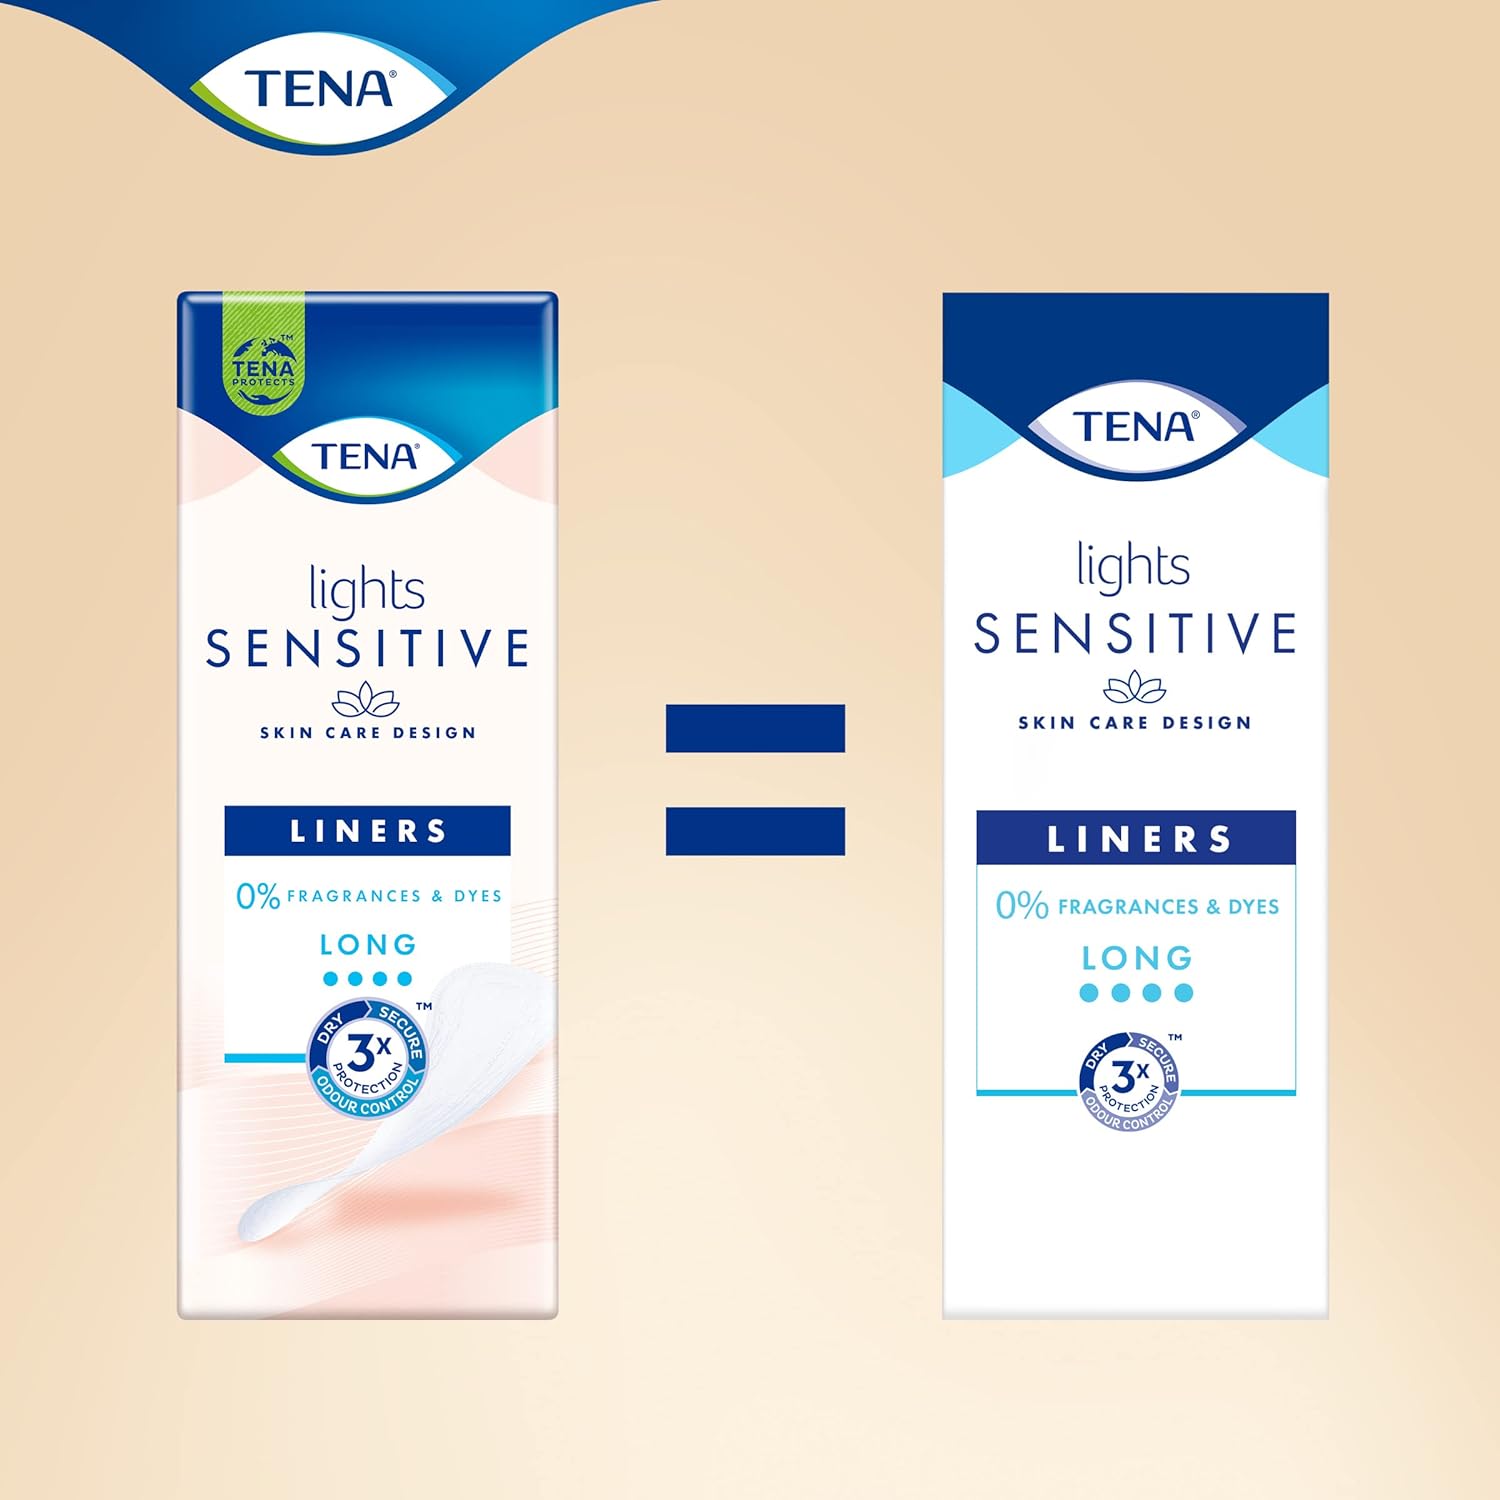 TENA Lights Long Liner, 120 Incontinence Liners ( 20 x 6 packs) 4059